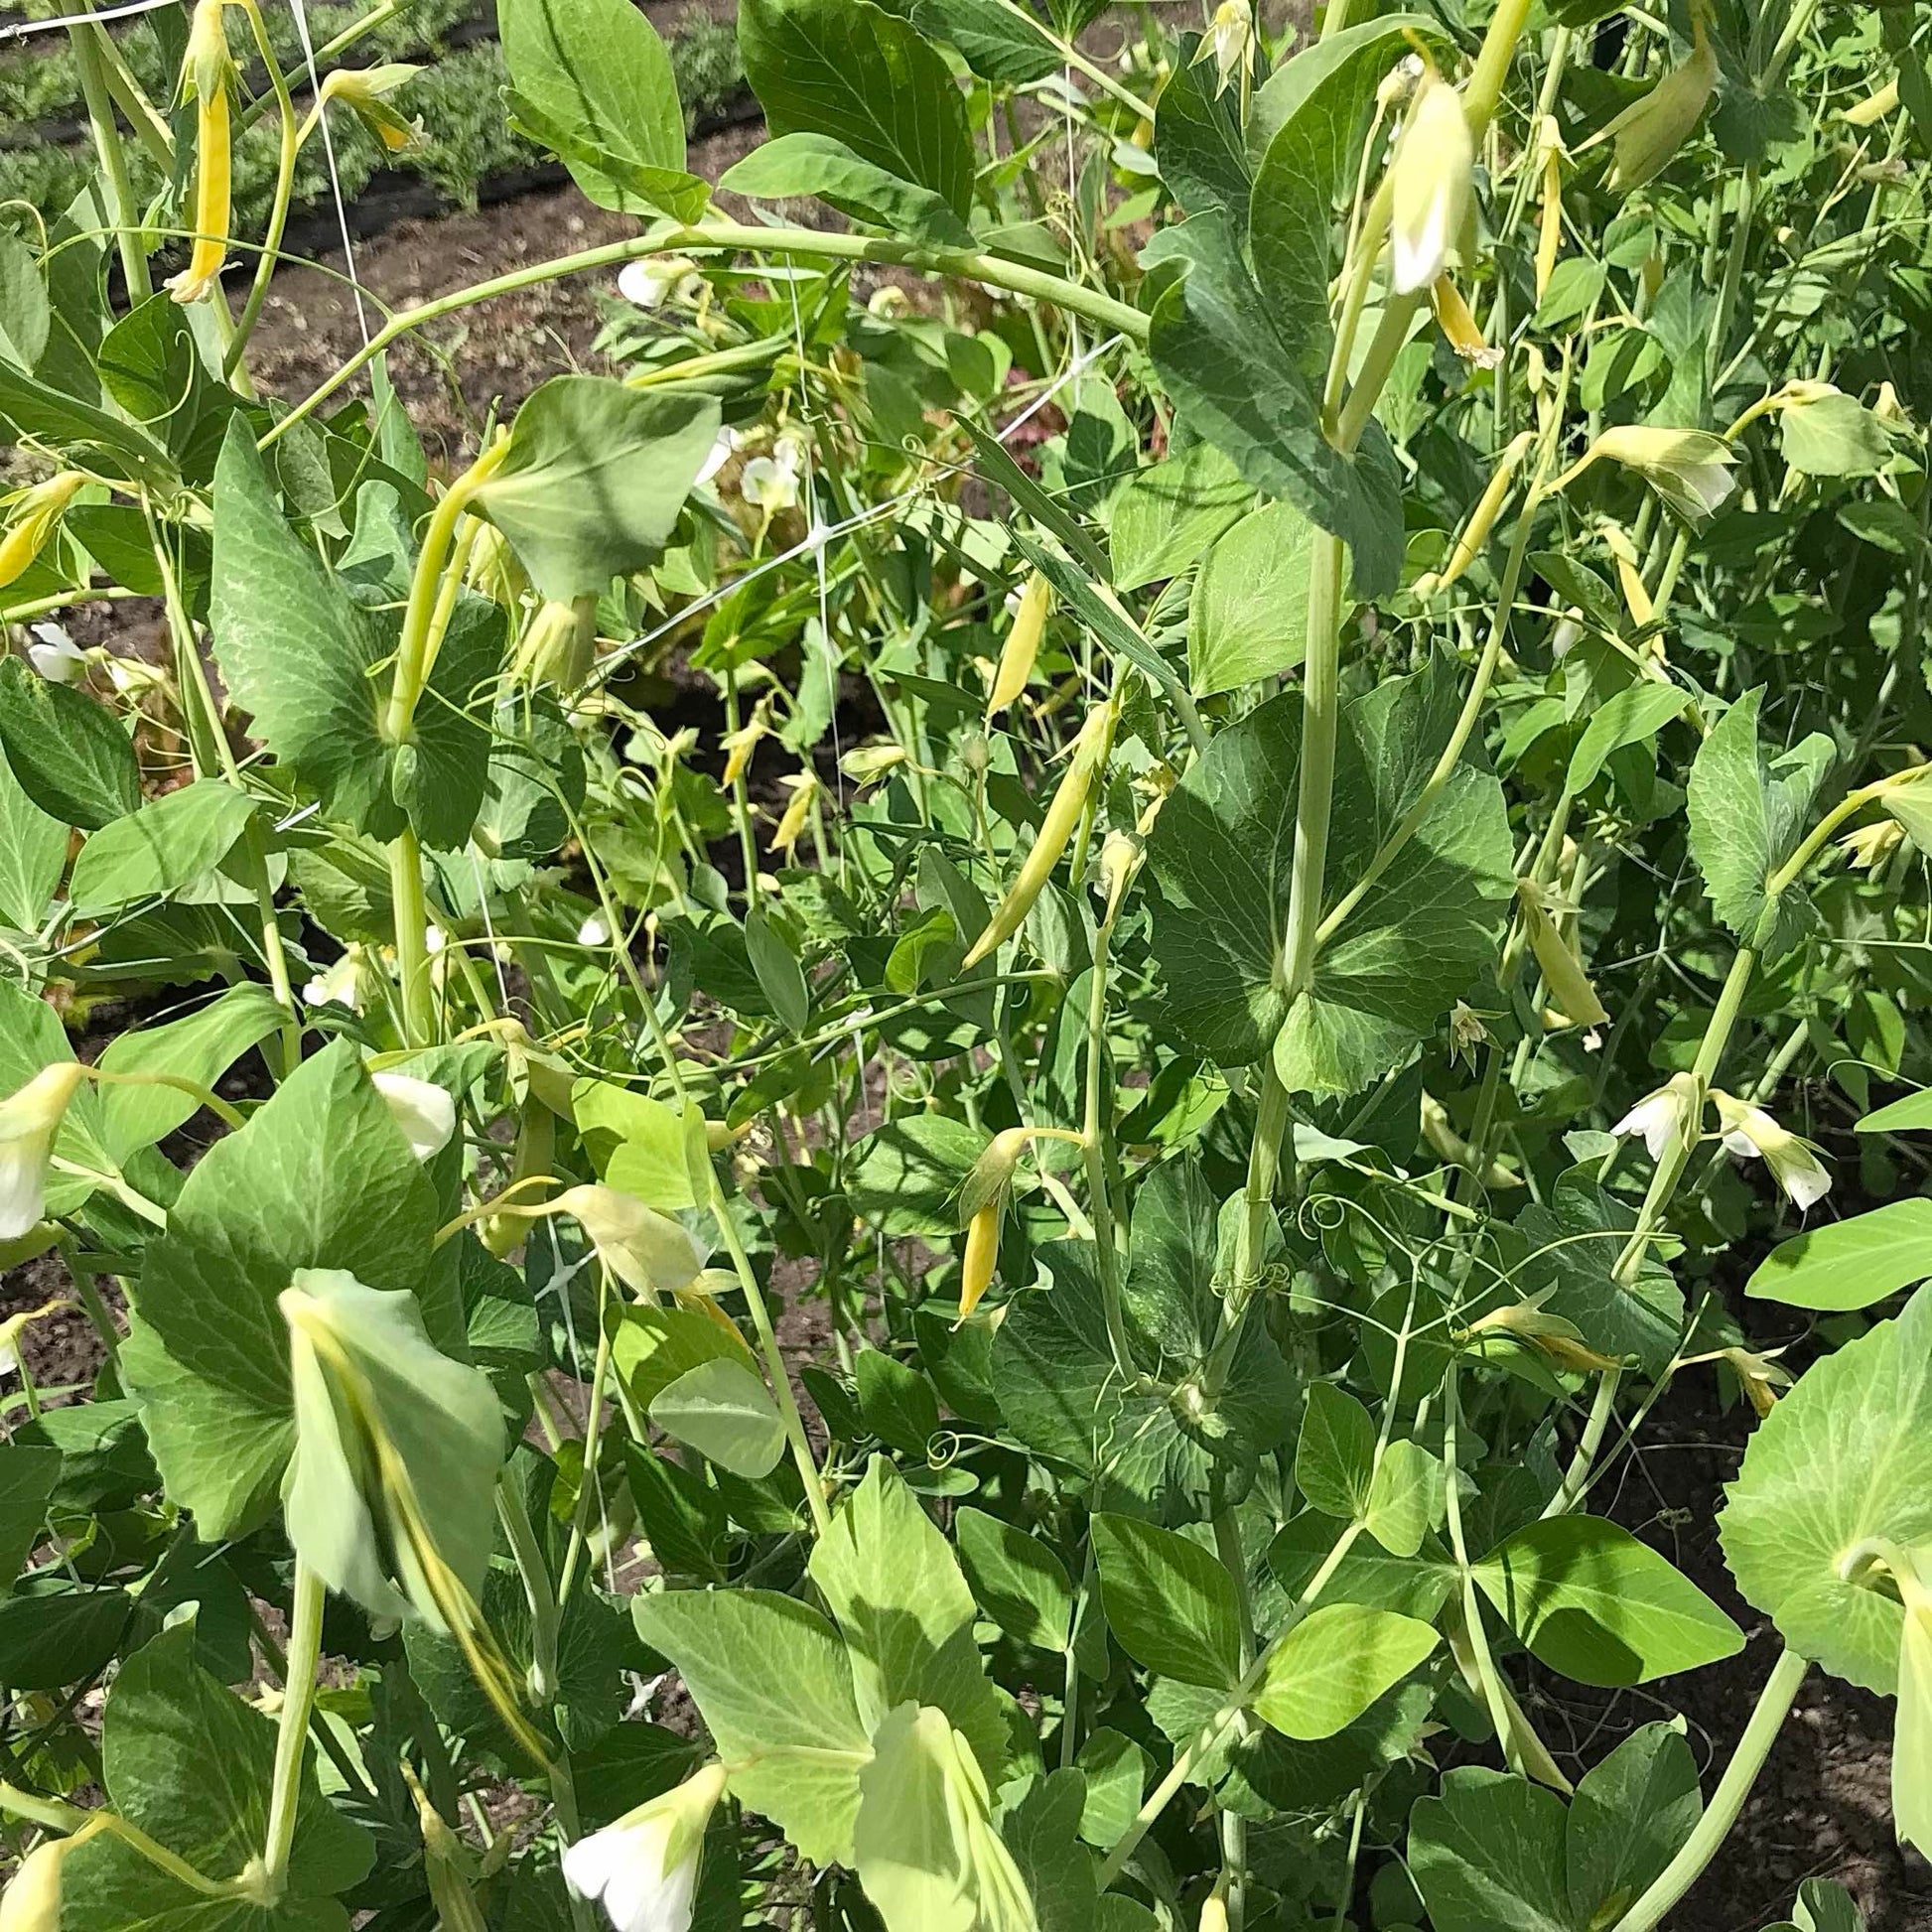 Young snap pea plants with yellow pods and white flowers.